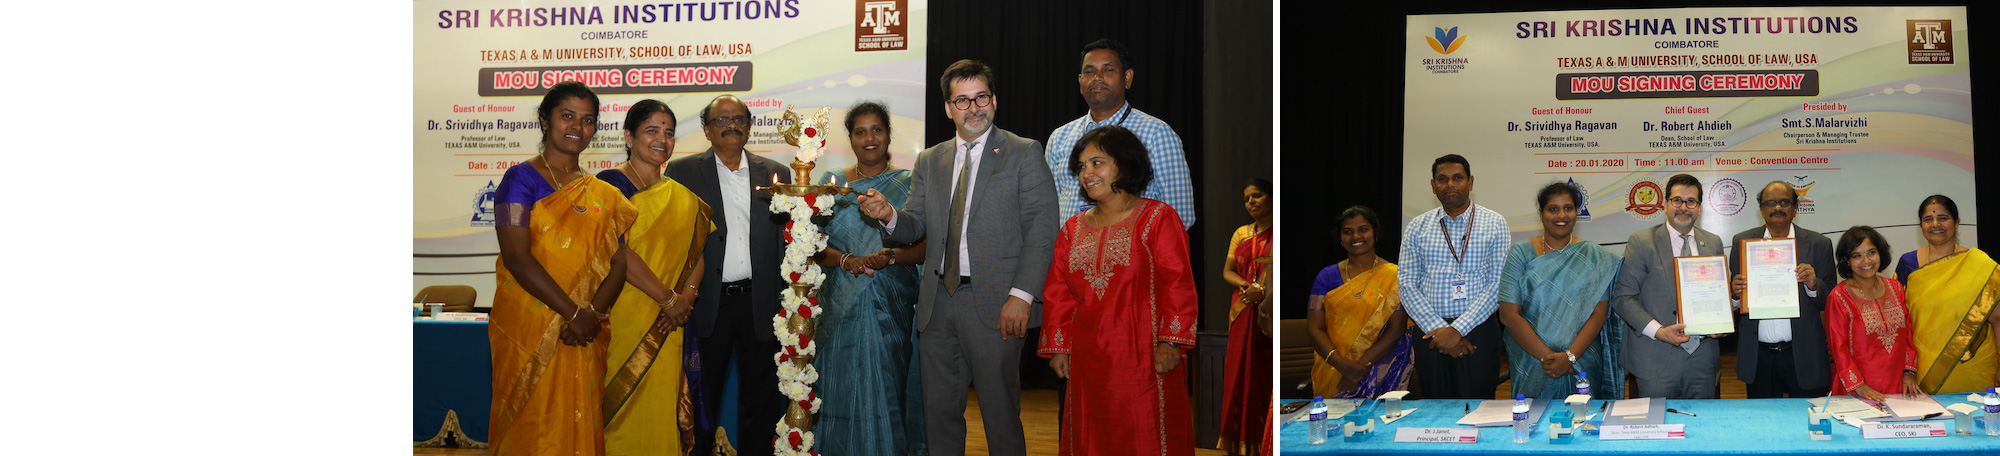 MoU with Texas A& M University